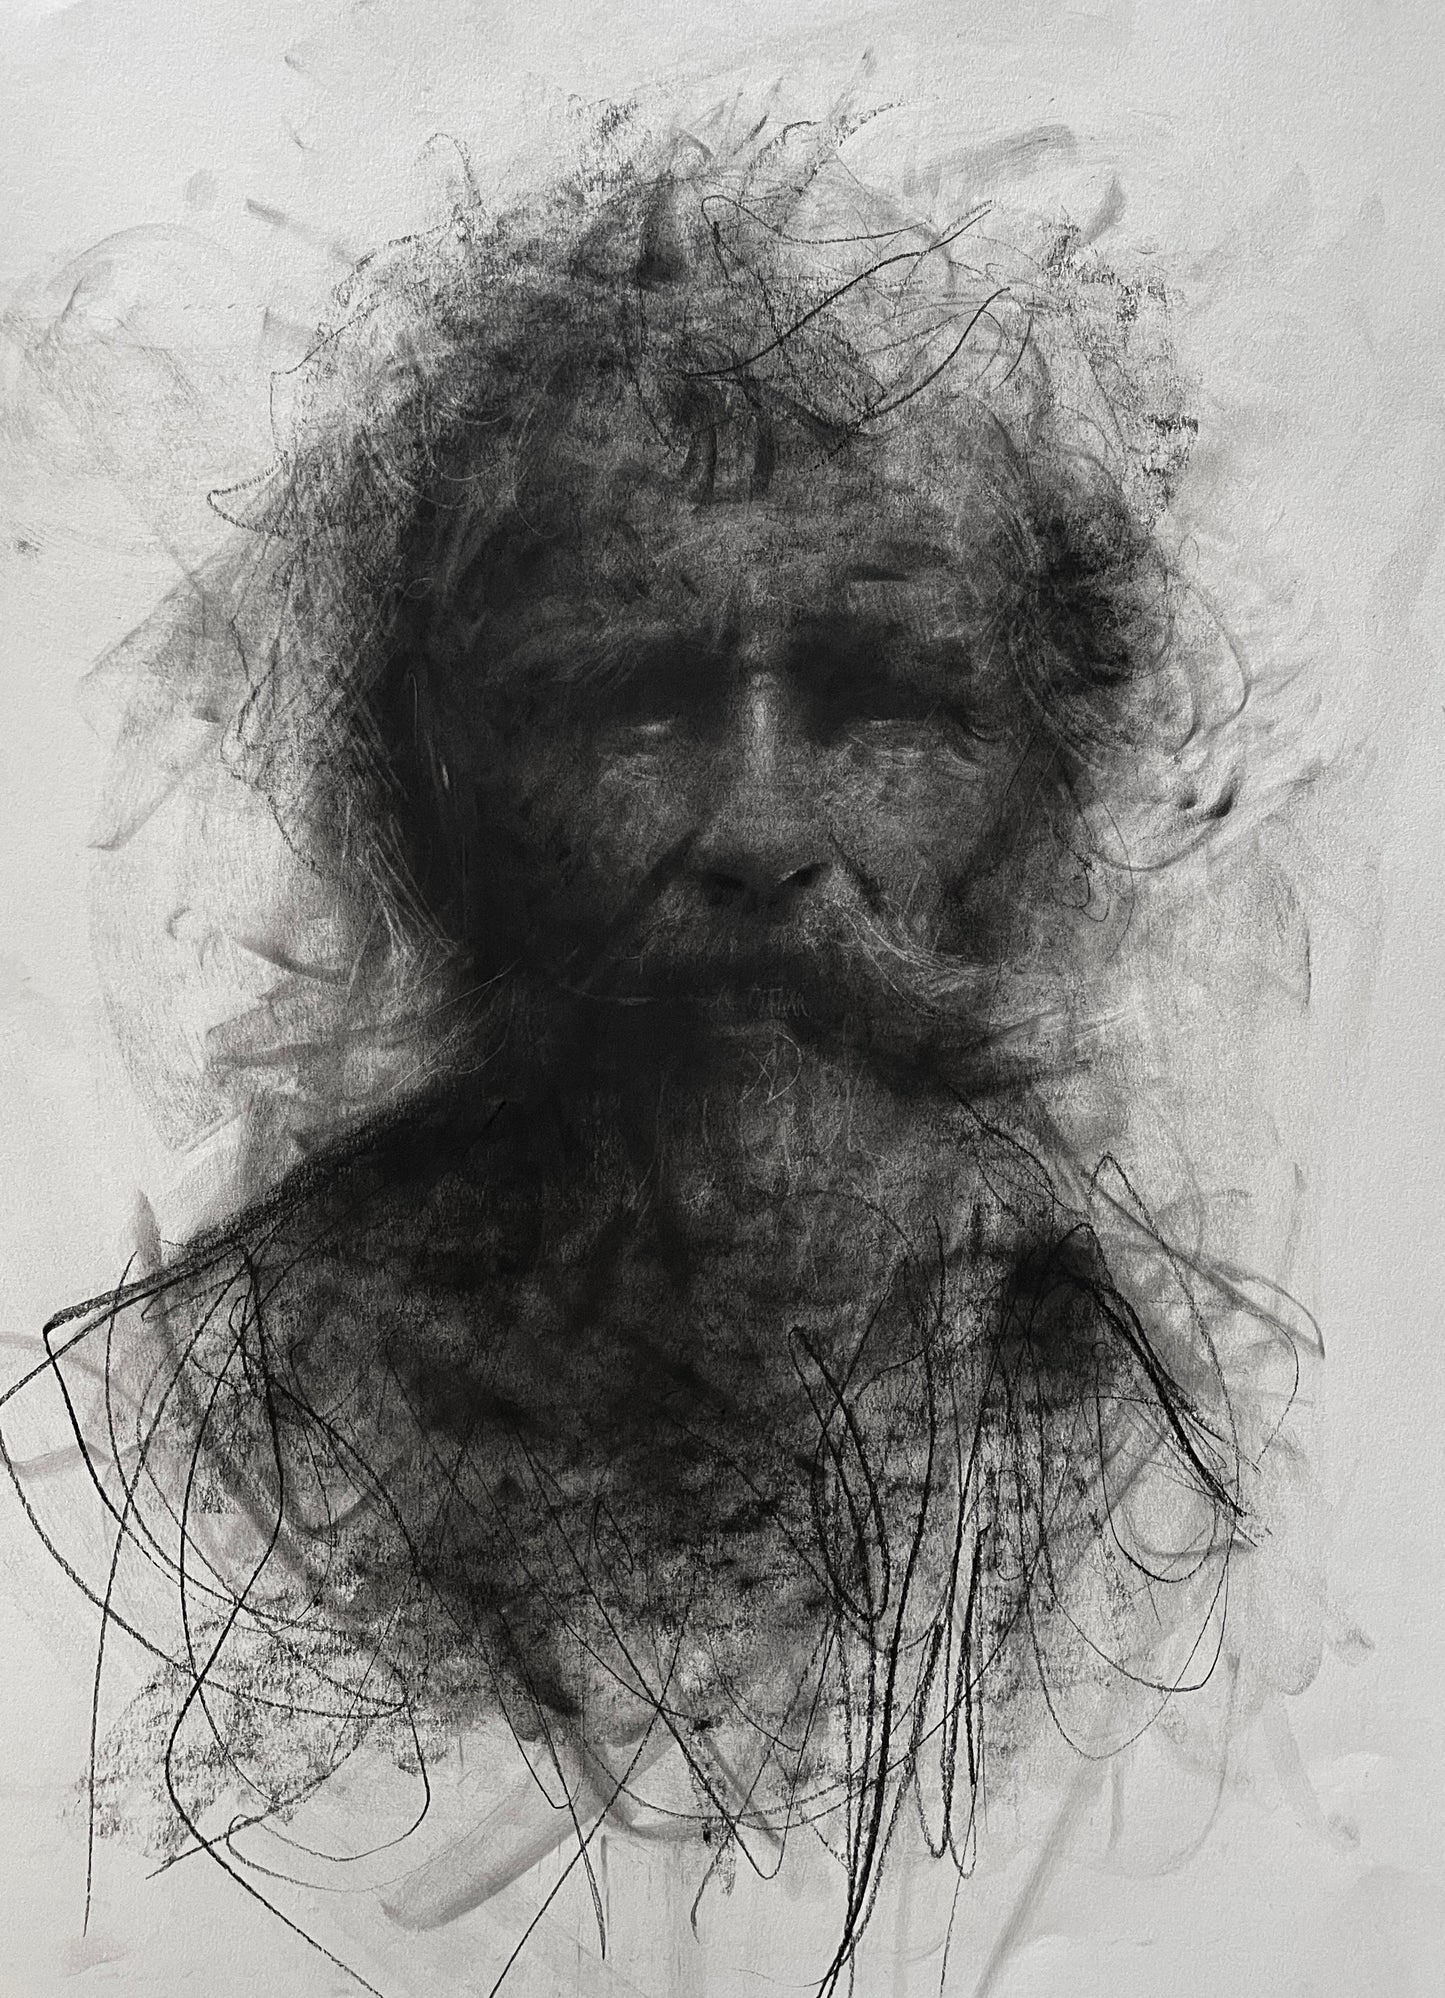 Original Drawing by Mad Charcoal of an Old Man in Black and White